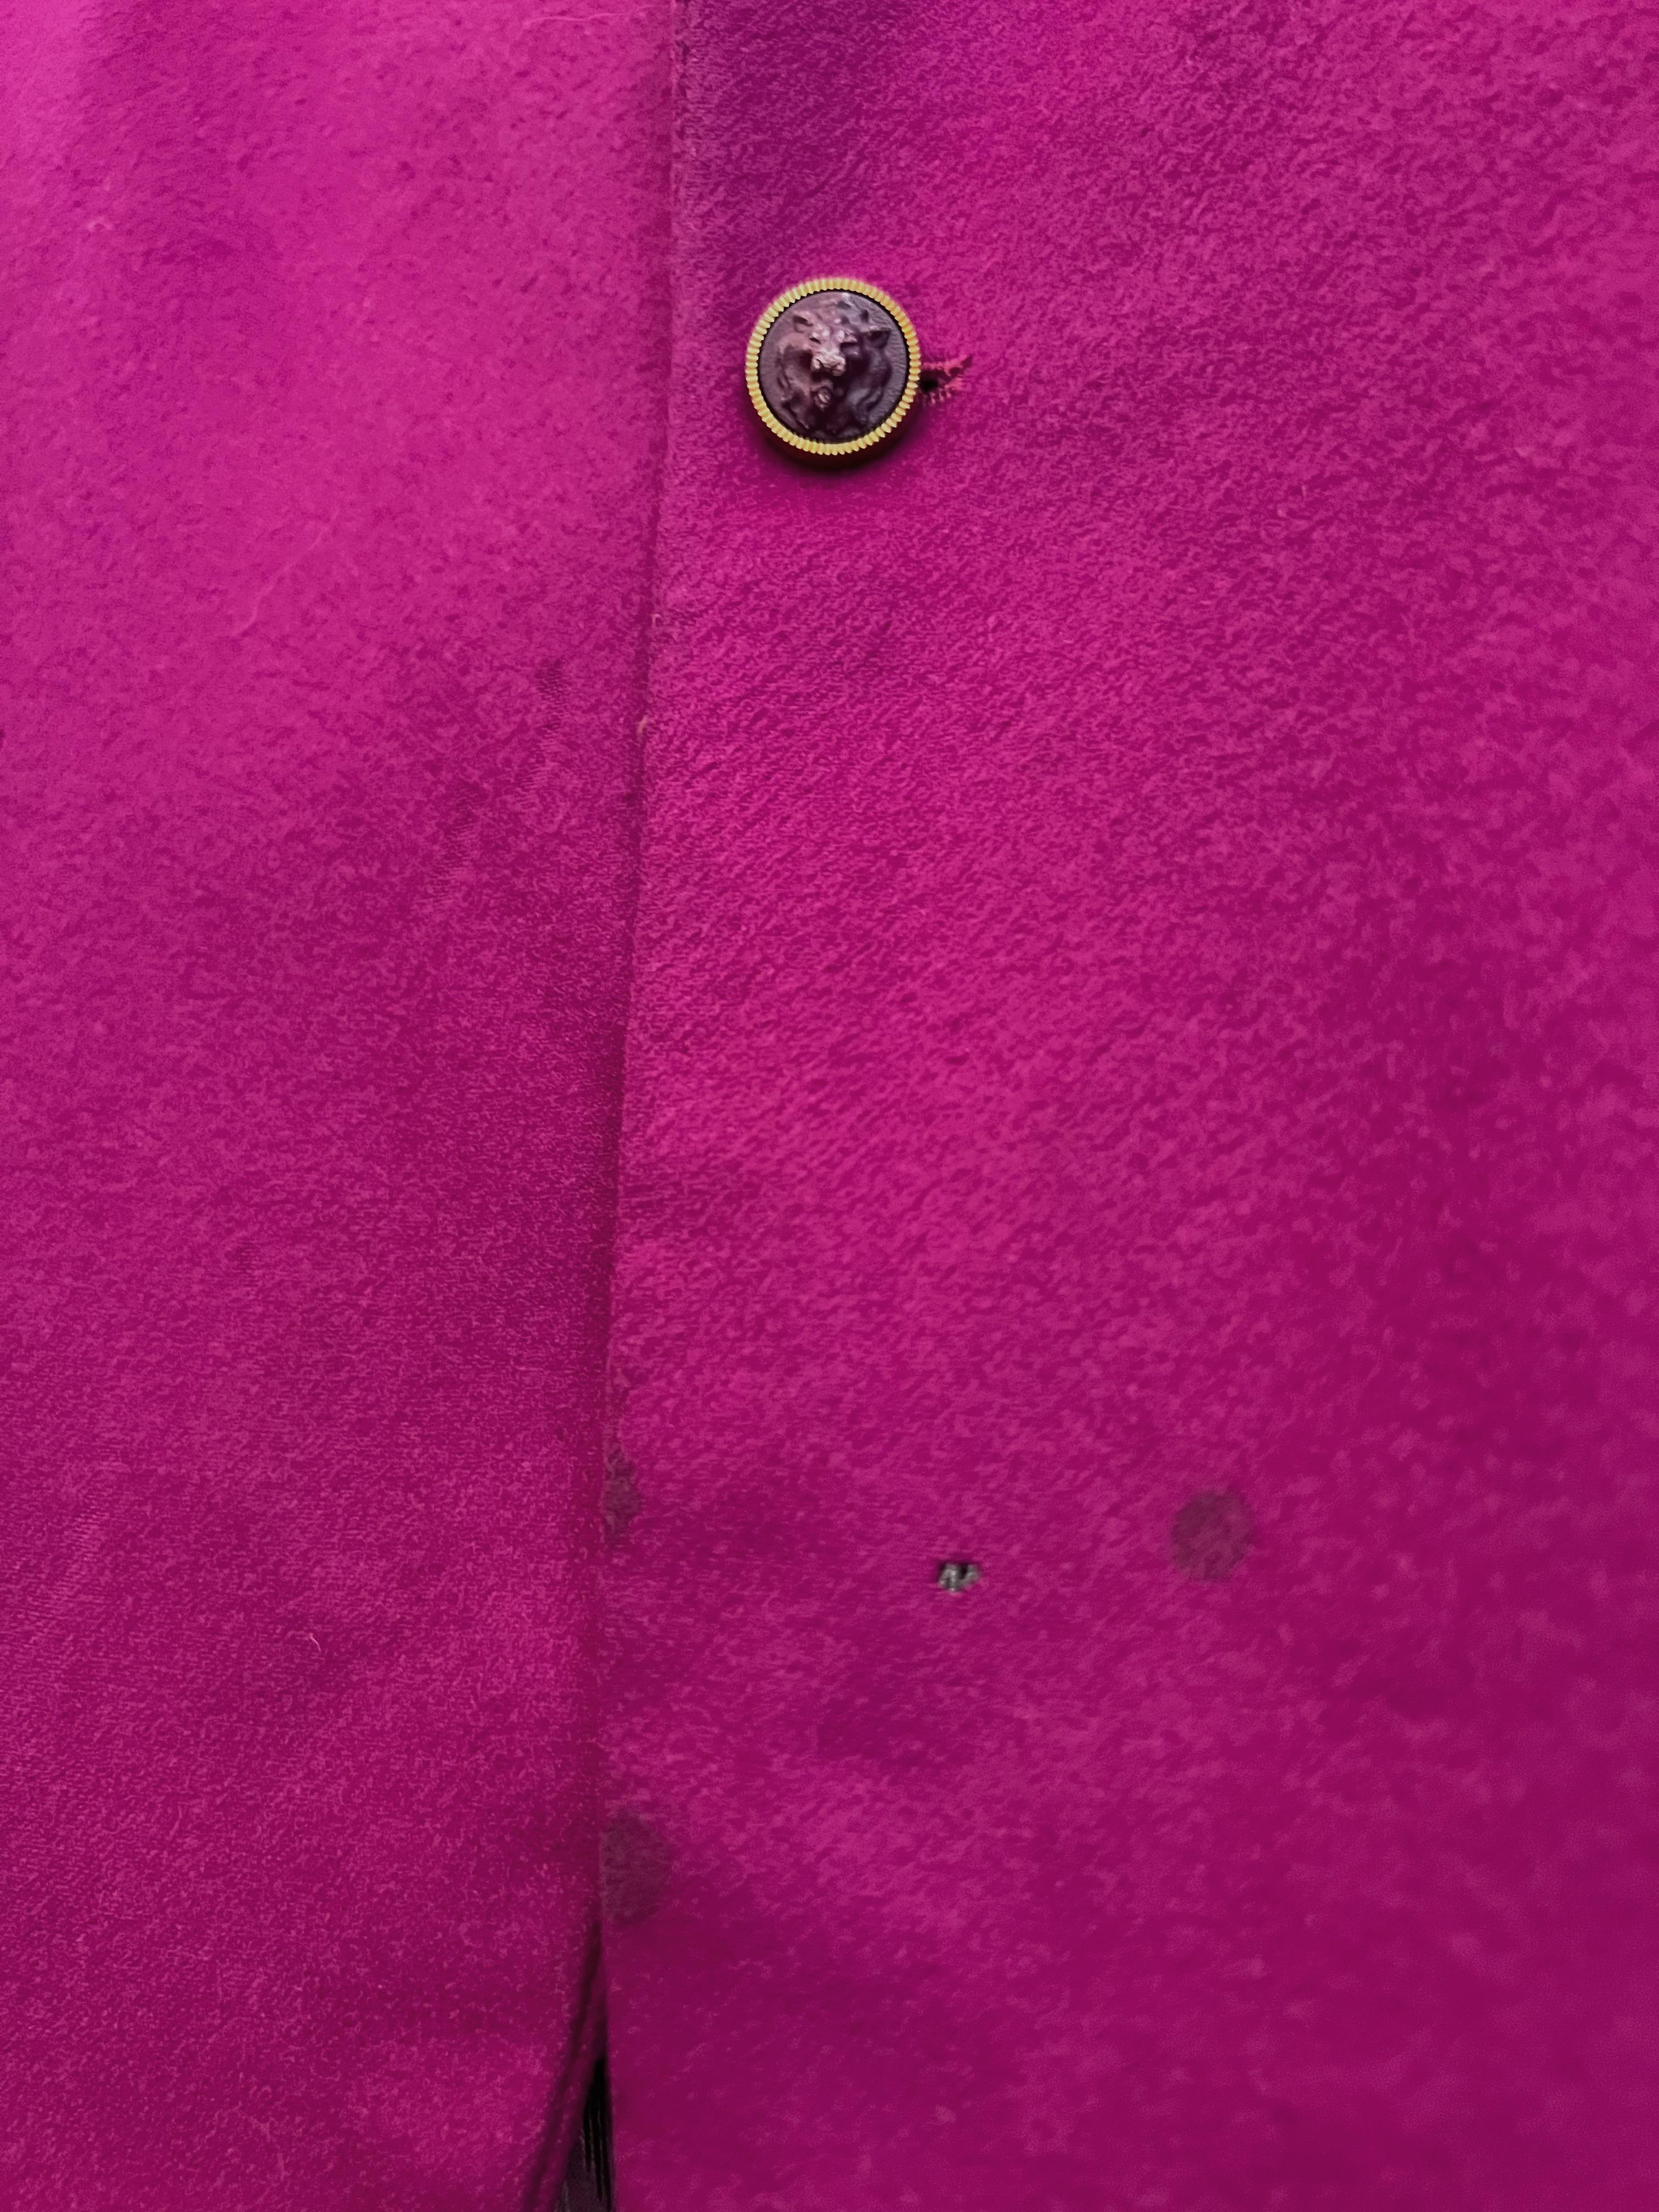 Versus by Gianni Versace Magenta Pink Rainbow Lined Cashmere Blazer Suit Jacket For Sale 10